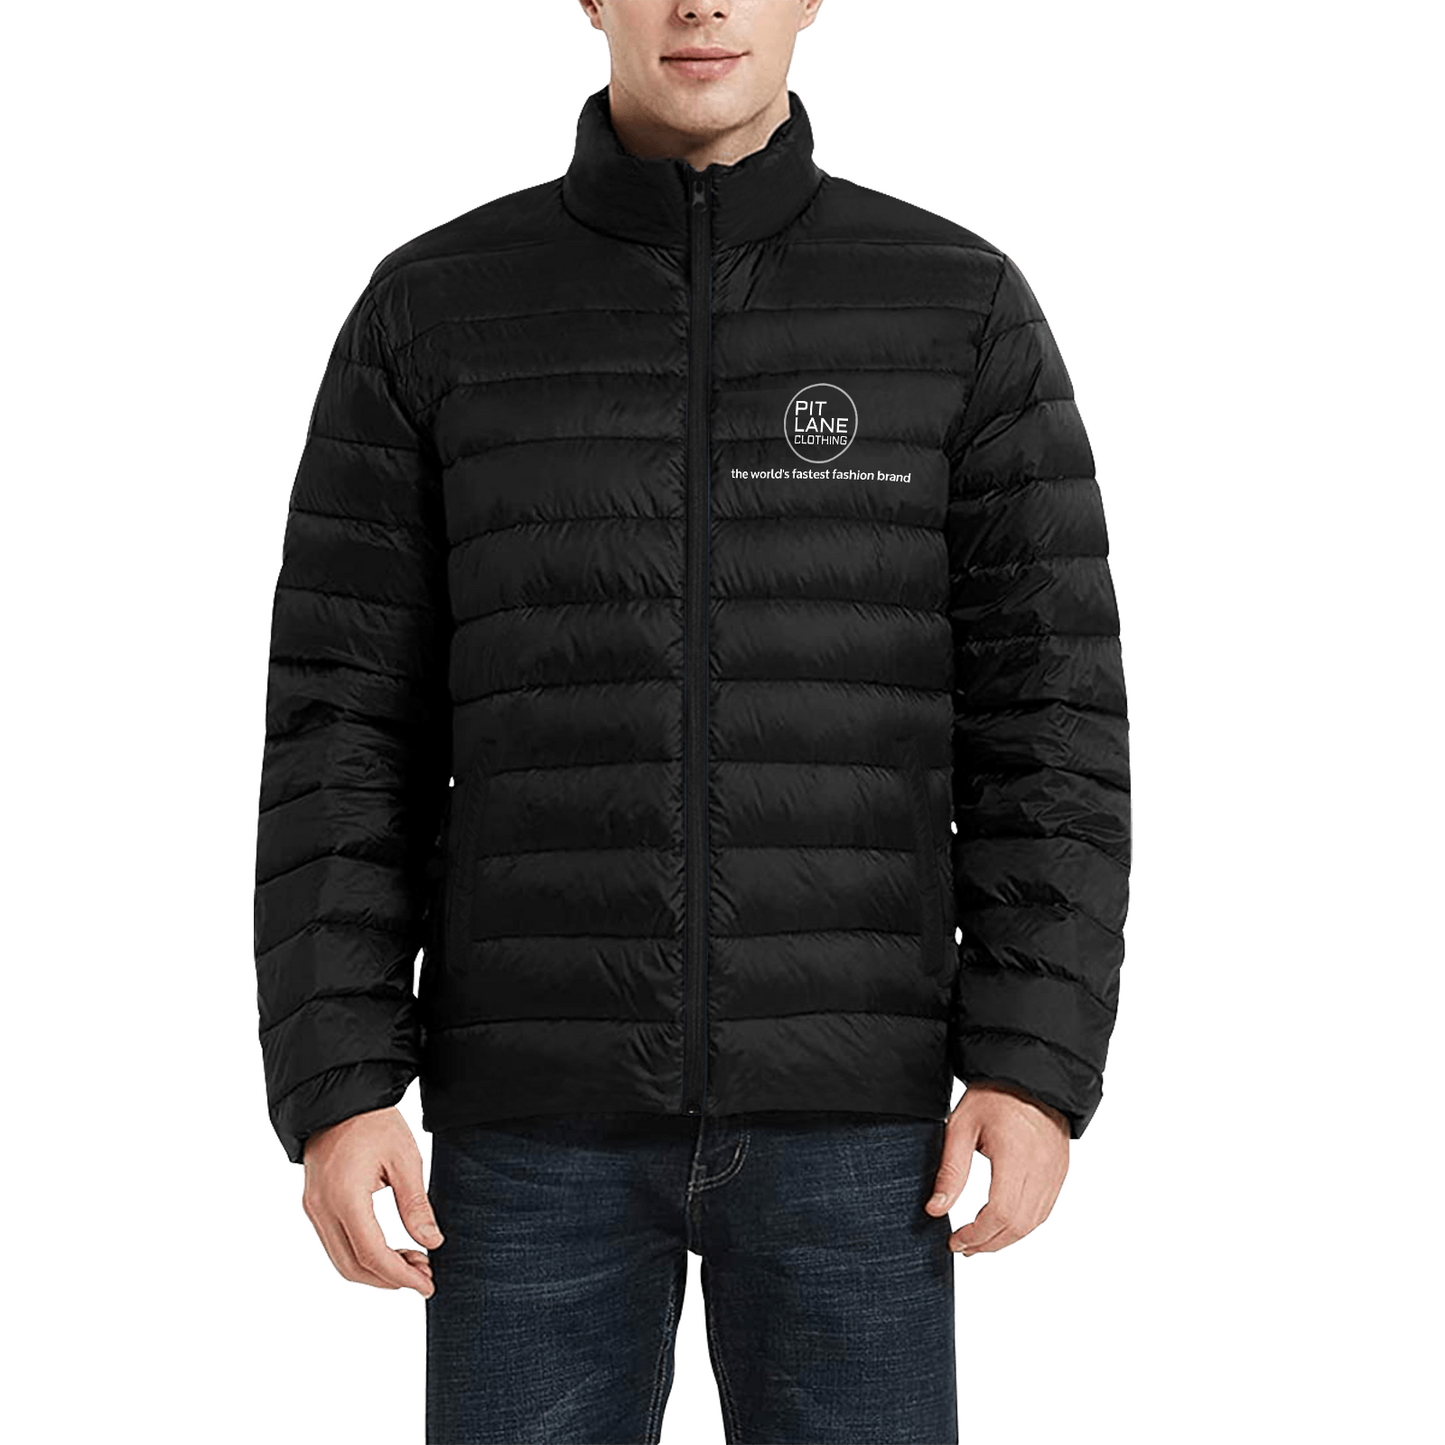 PIT LANE CLOTHING Team Quilted Puffer jacket